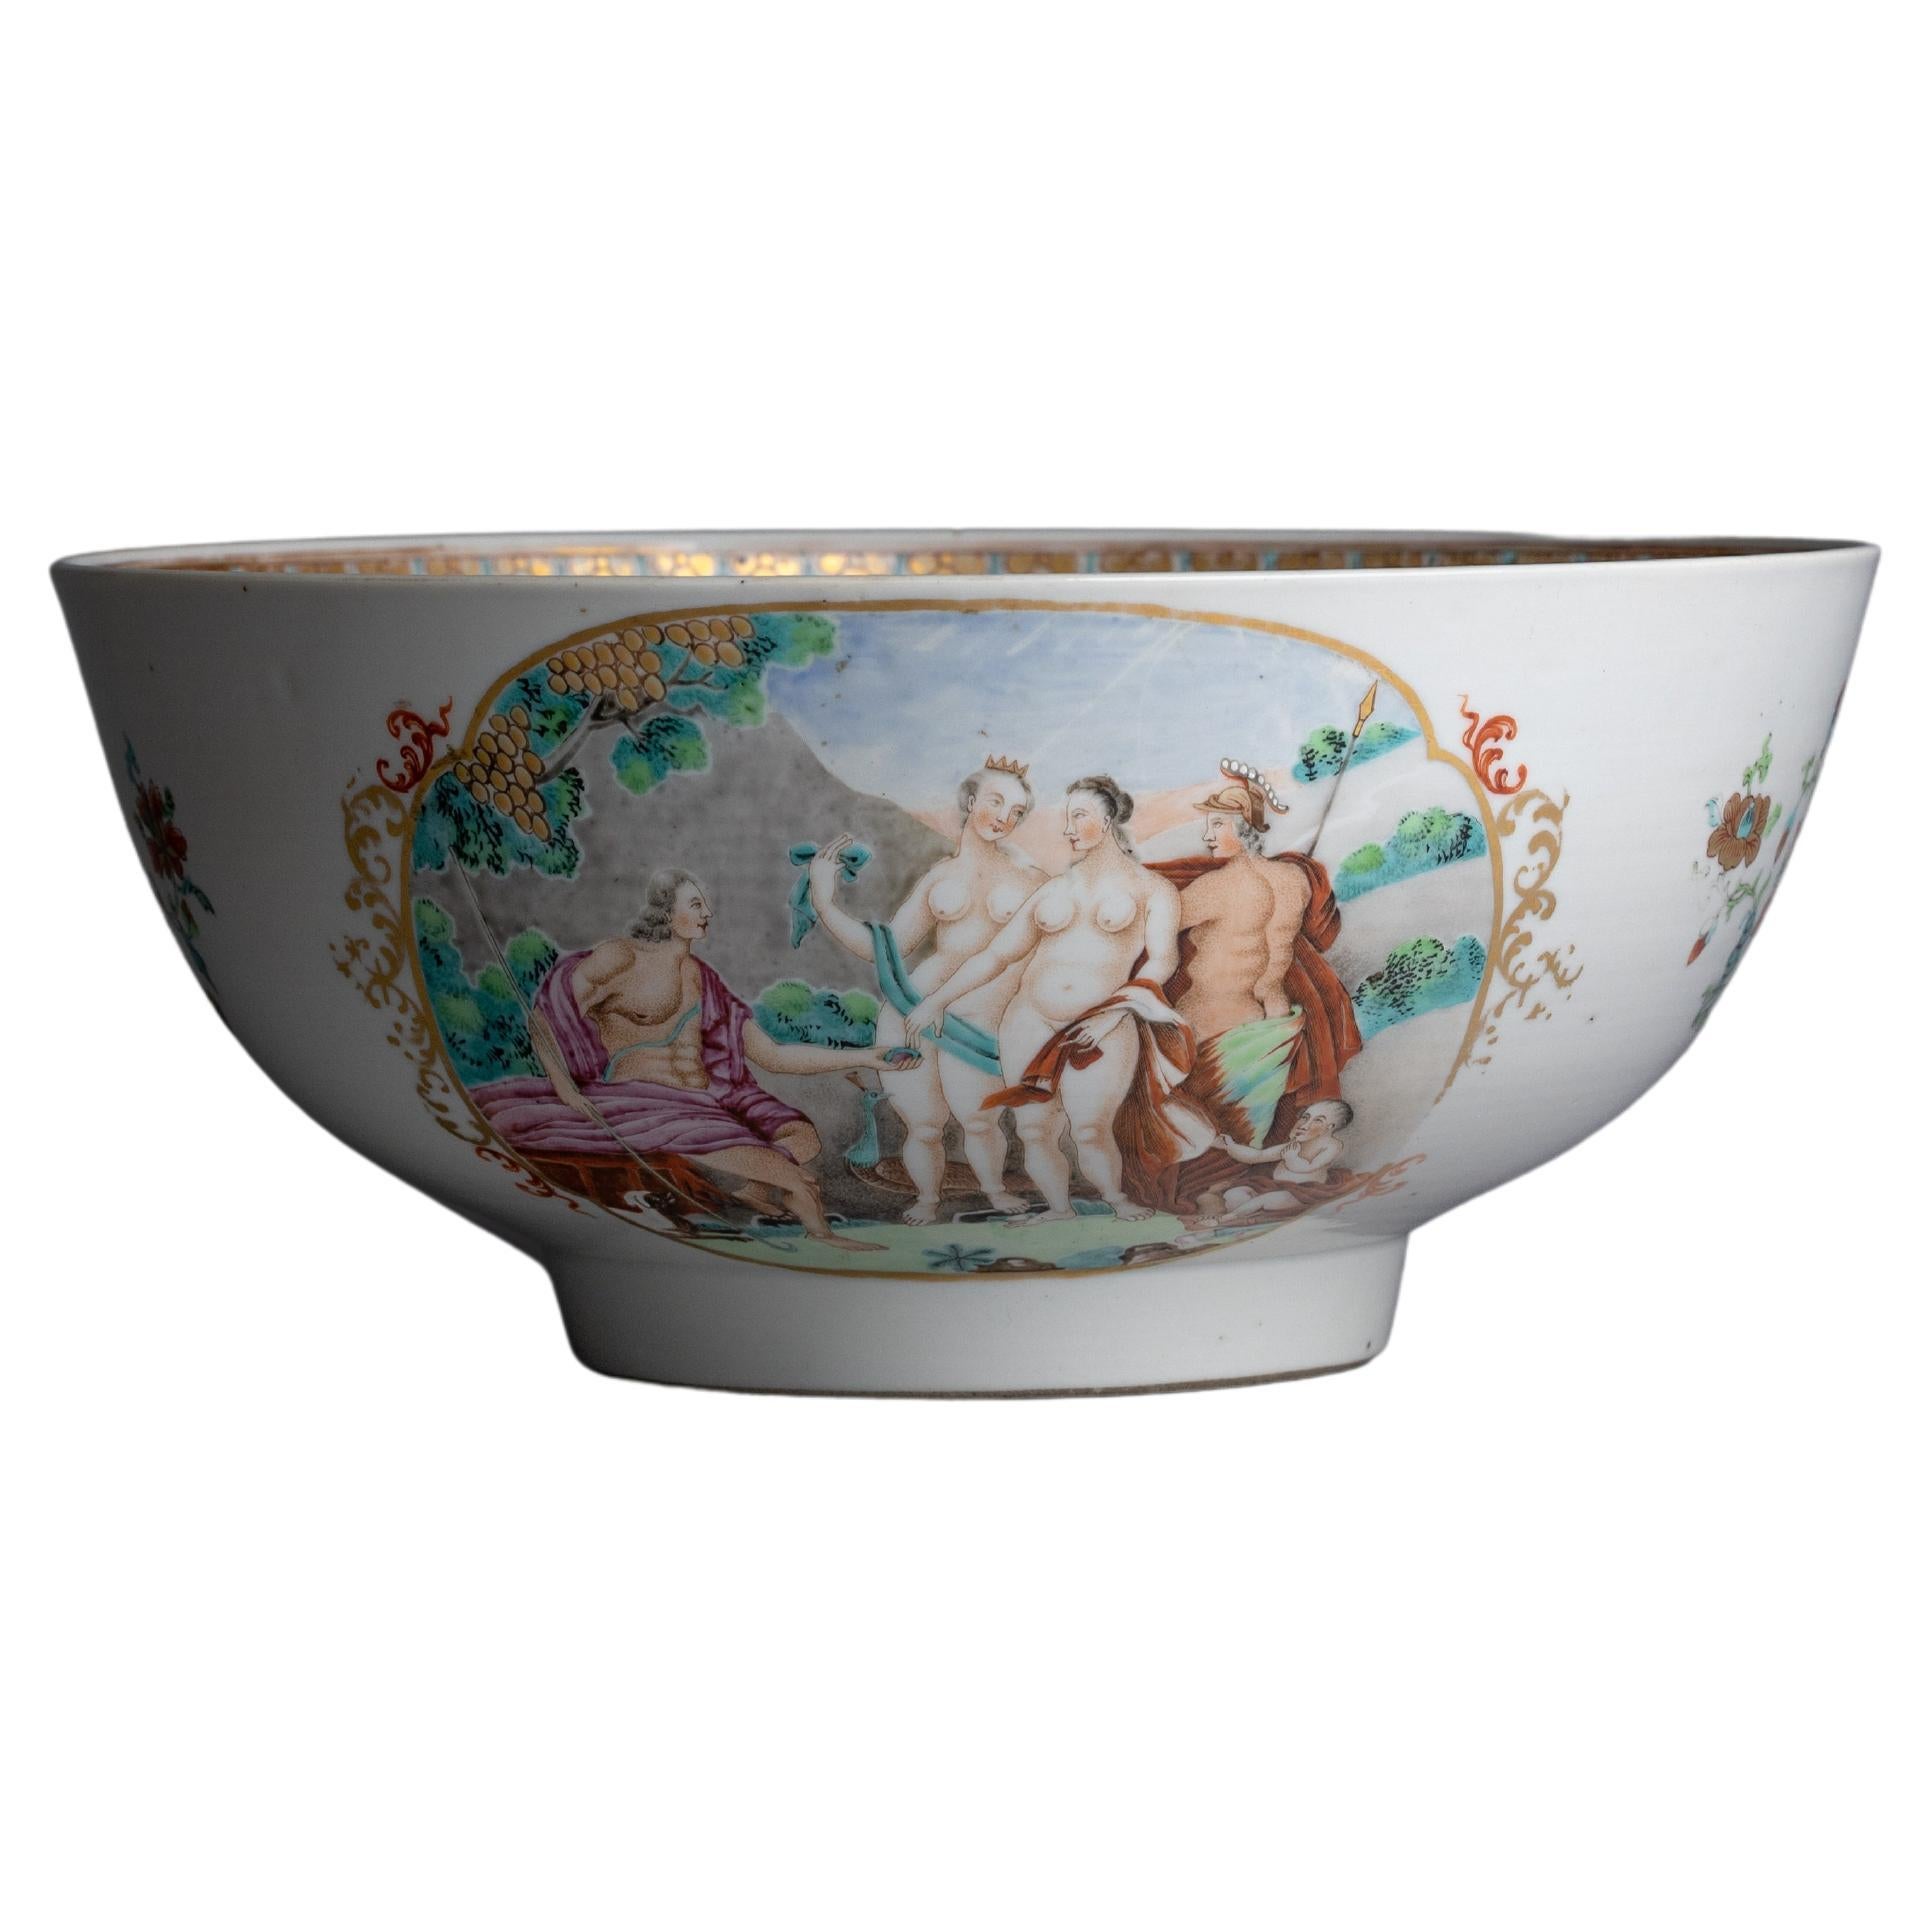 18th Century Chinese Export Porcelain Punch Bowl